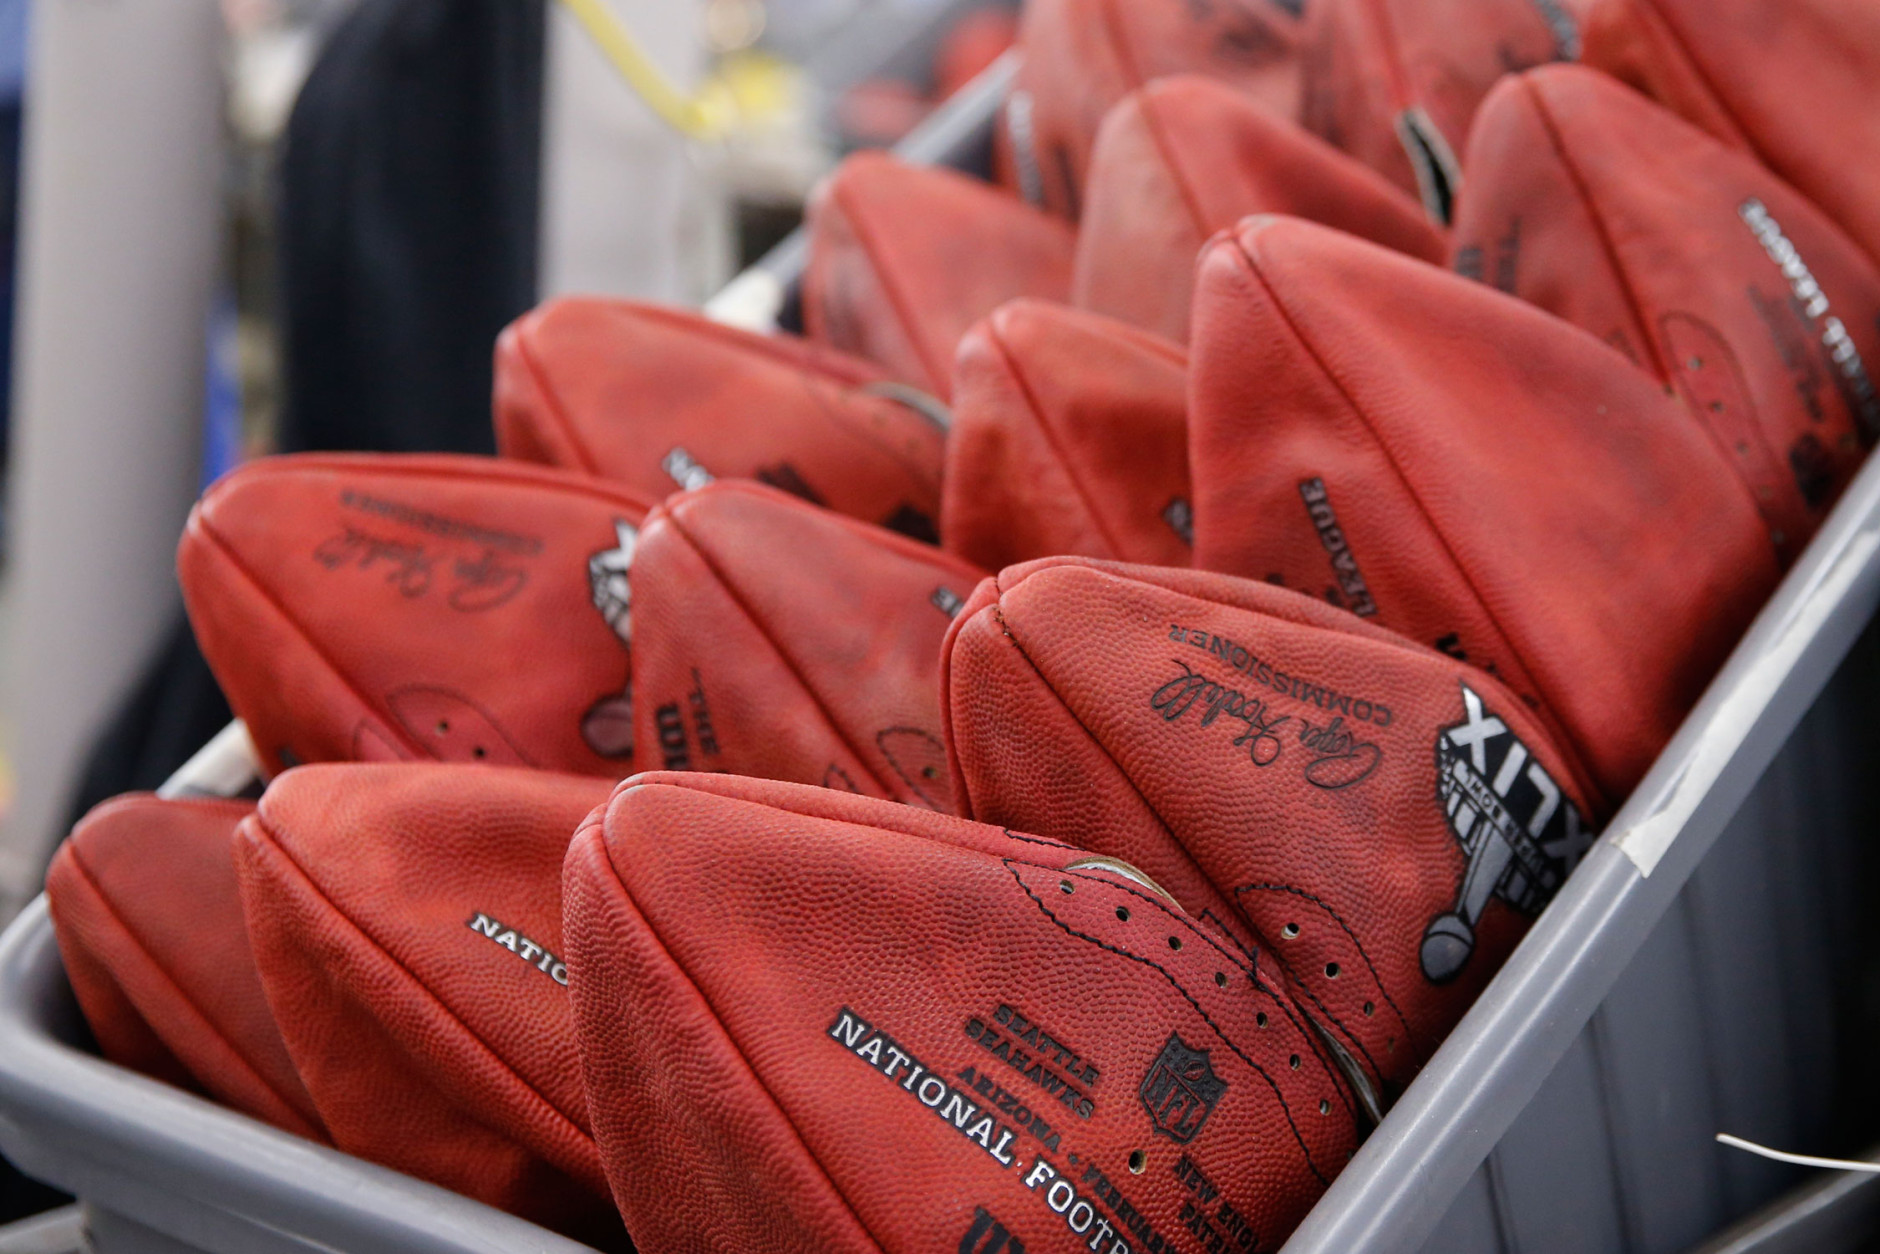 The controversy over potentially deflated footballs keeps the NFL relevant and top of mind in the two weeks between Championship Sunday and the Super Bowl. (AP Photo/Rick Osentoski)